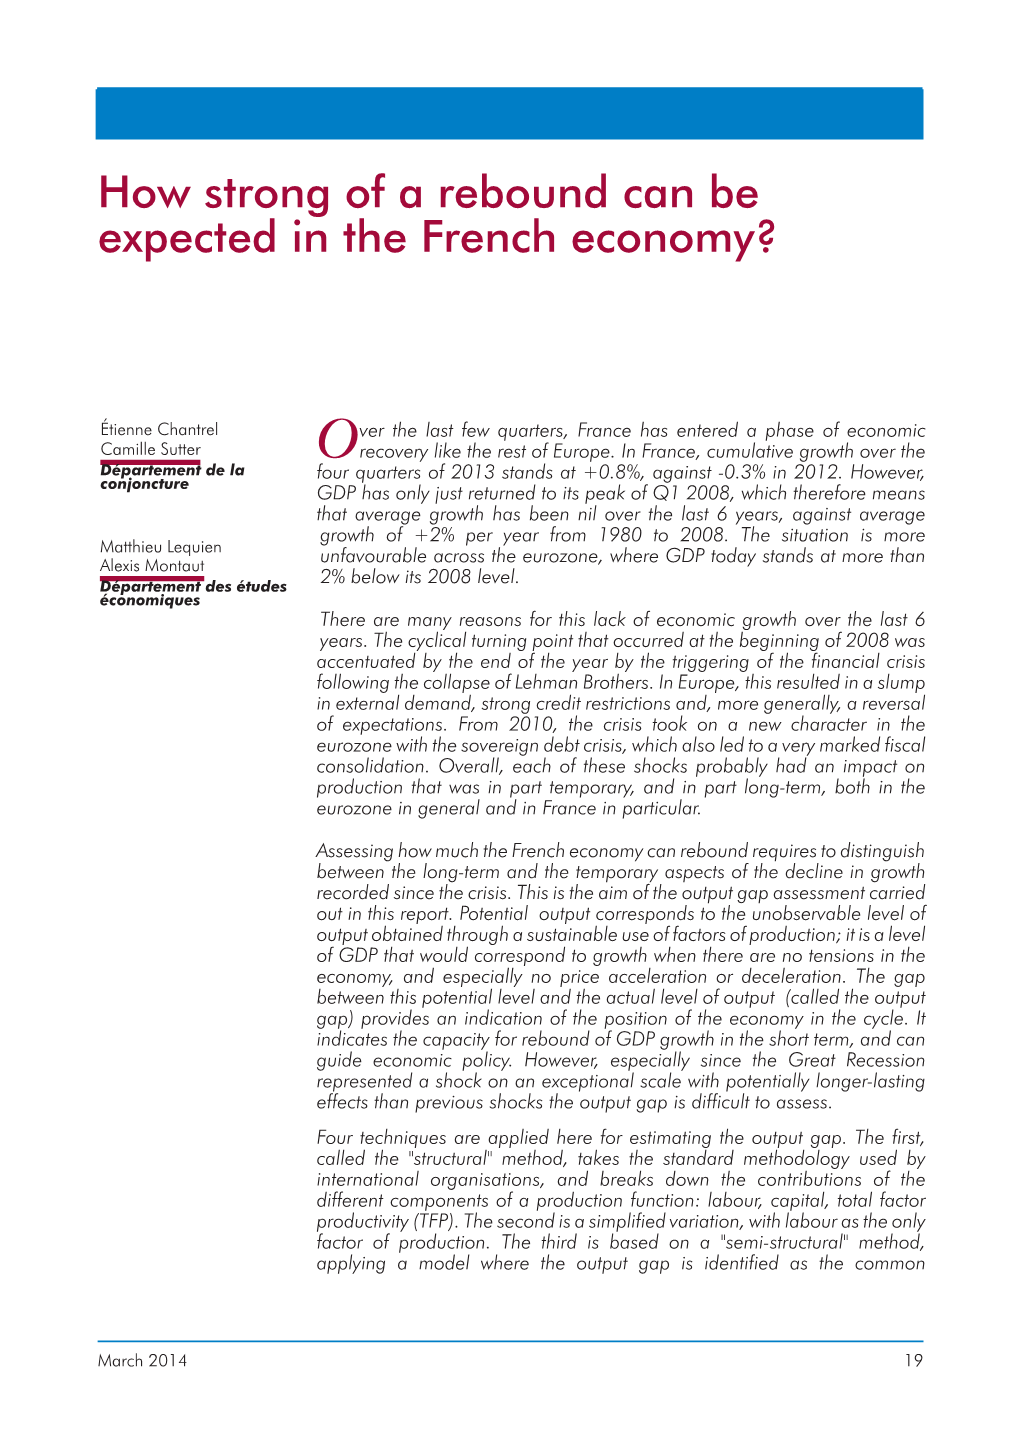 How Strong of a Rebound Can Be Expected in the French Economy?